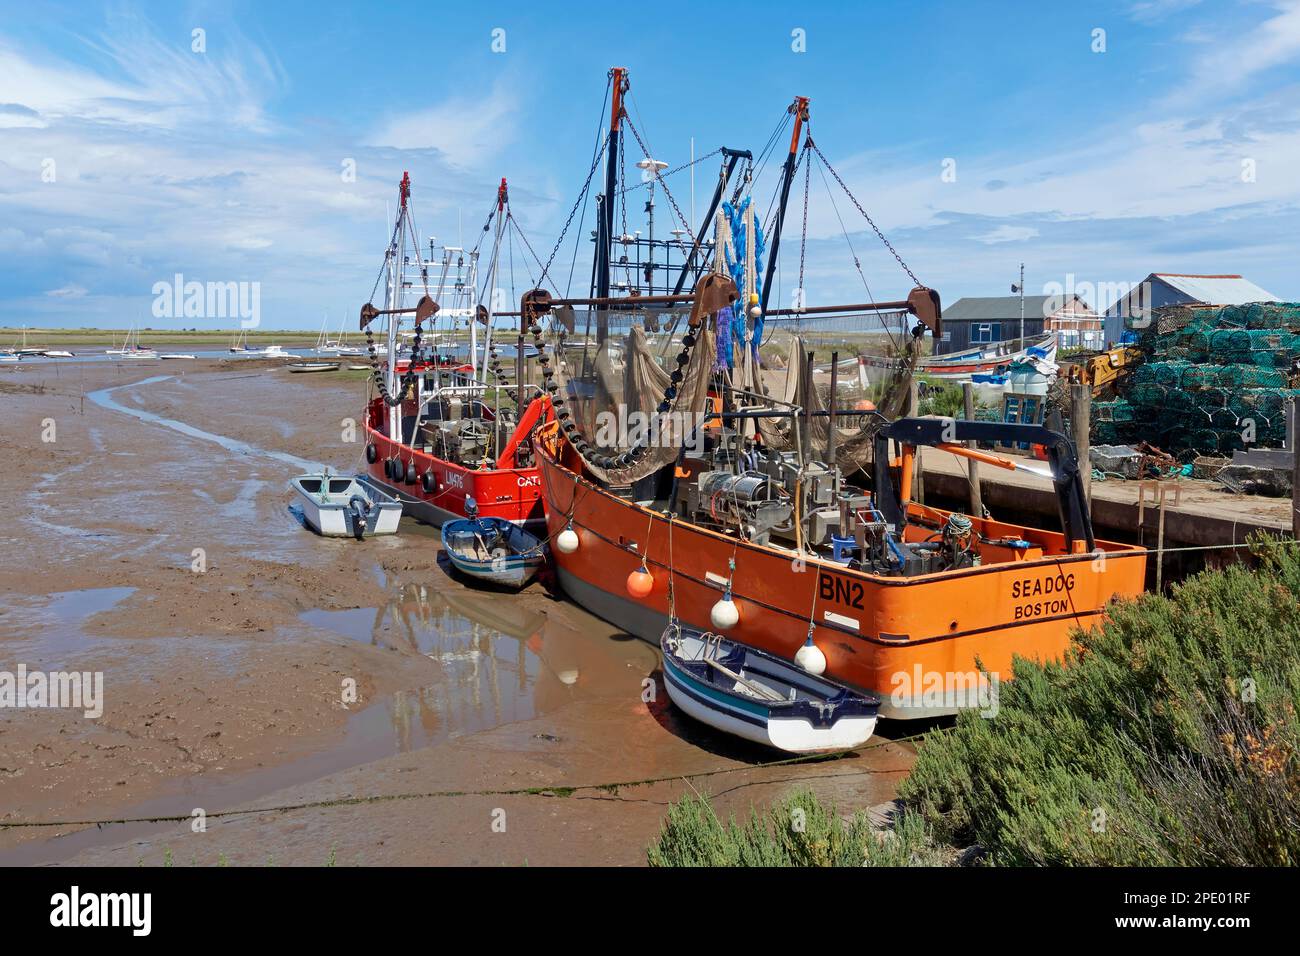 The beam trawlers moored at Brancaster Staithe Quay, Norfolk, England. Stock Photo